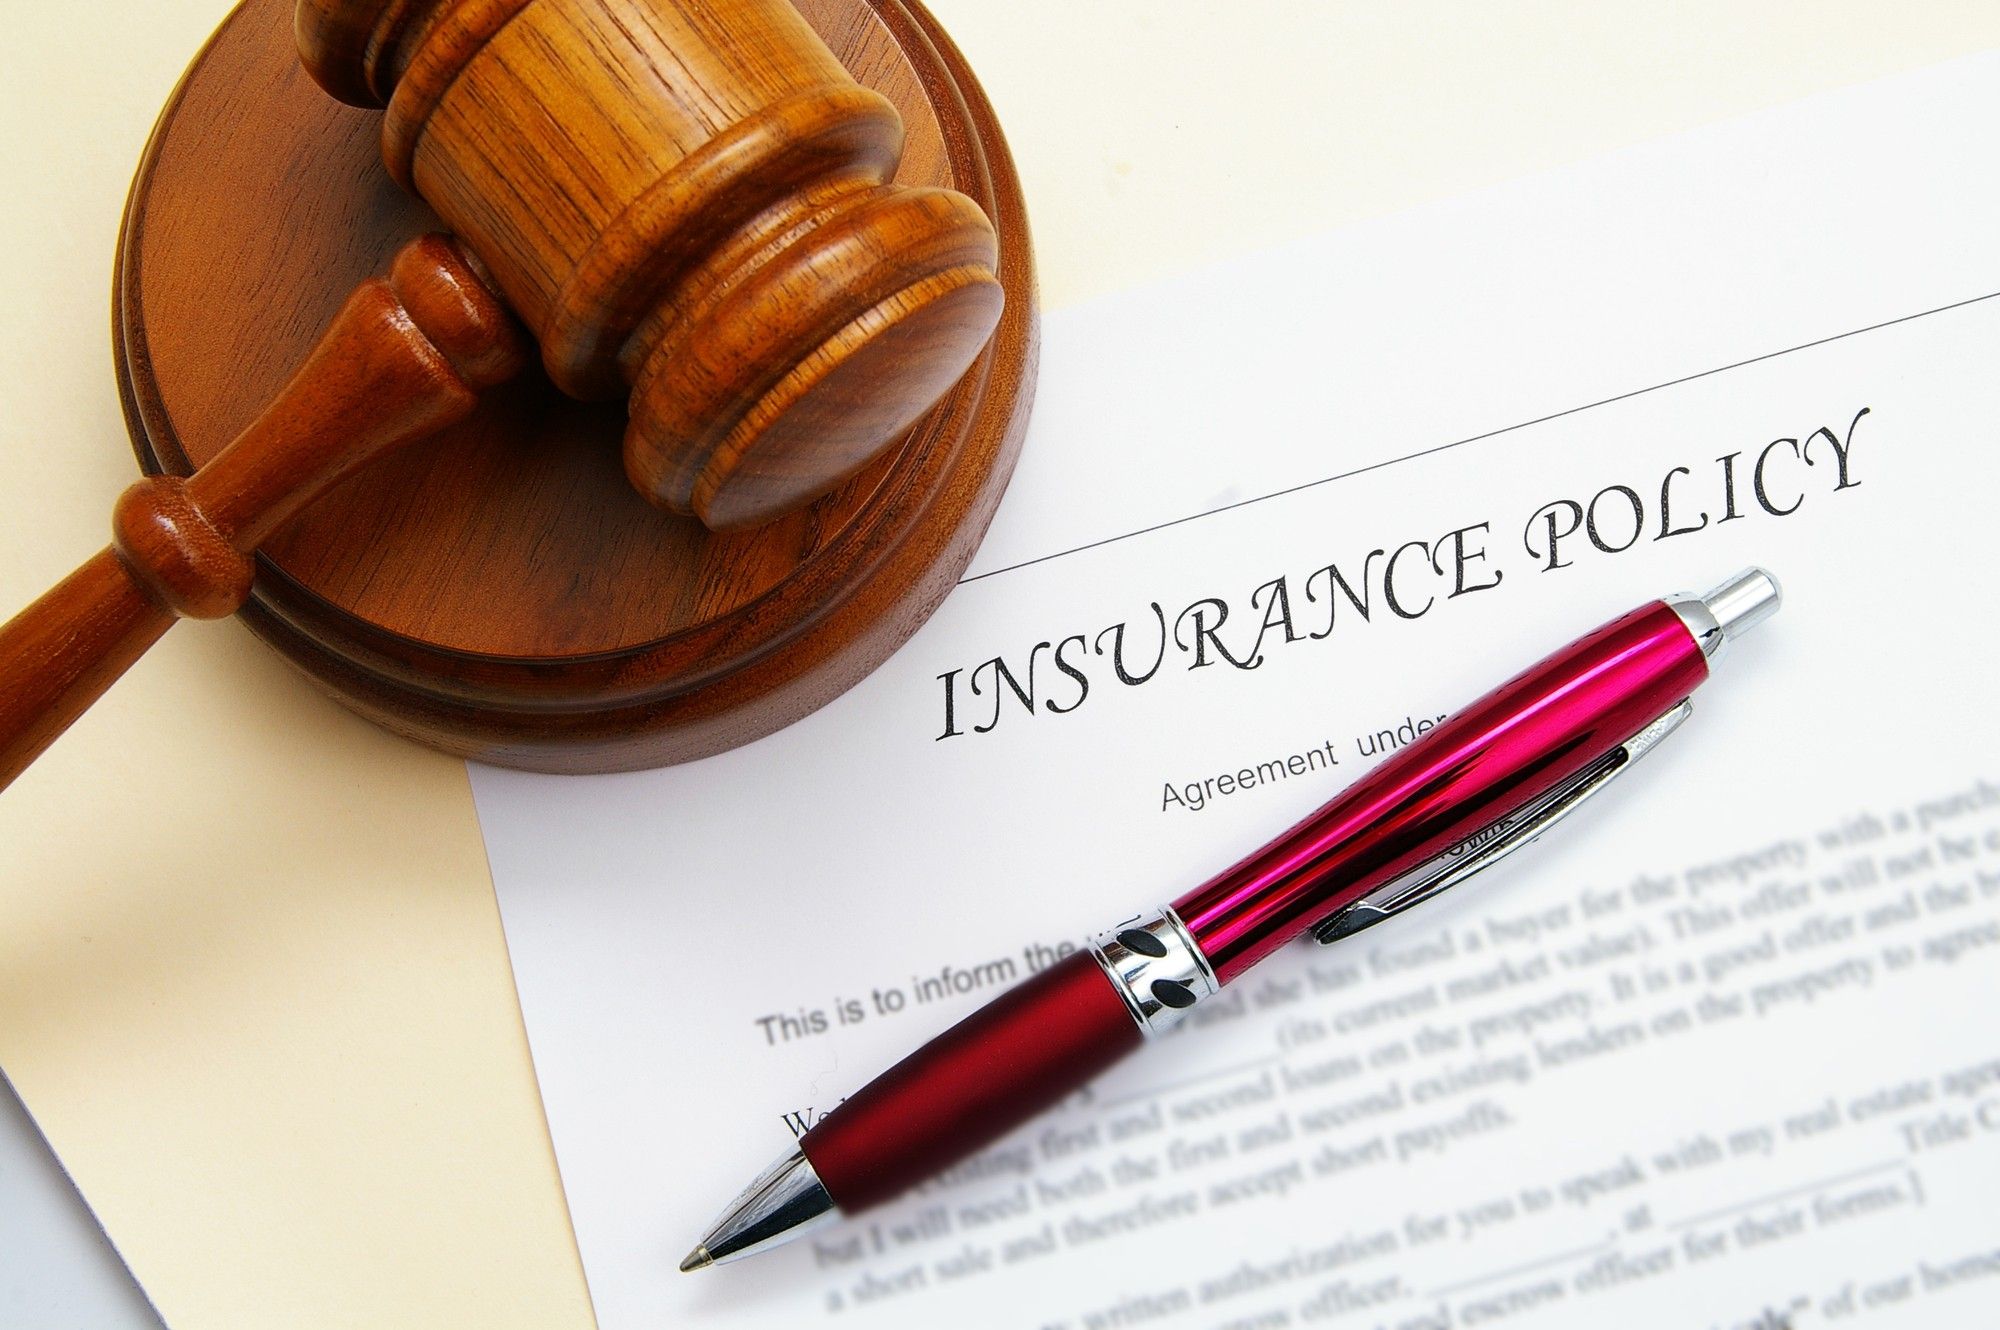 What Are the Life Insurance Laws in California? Top Class Actions